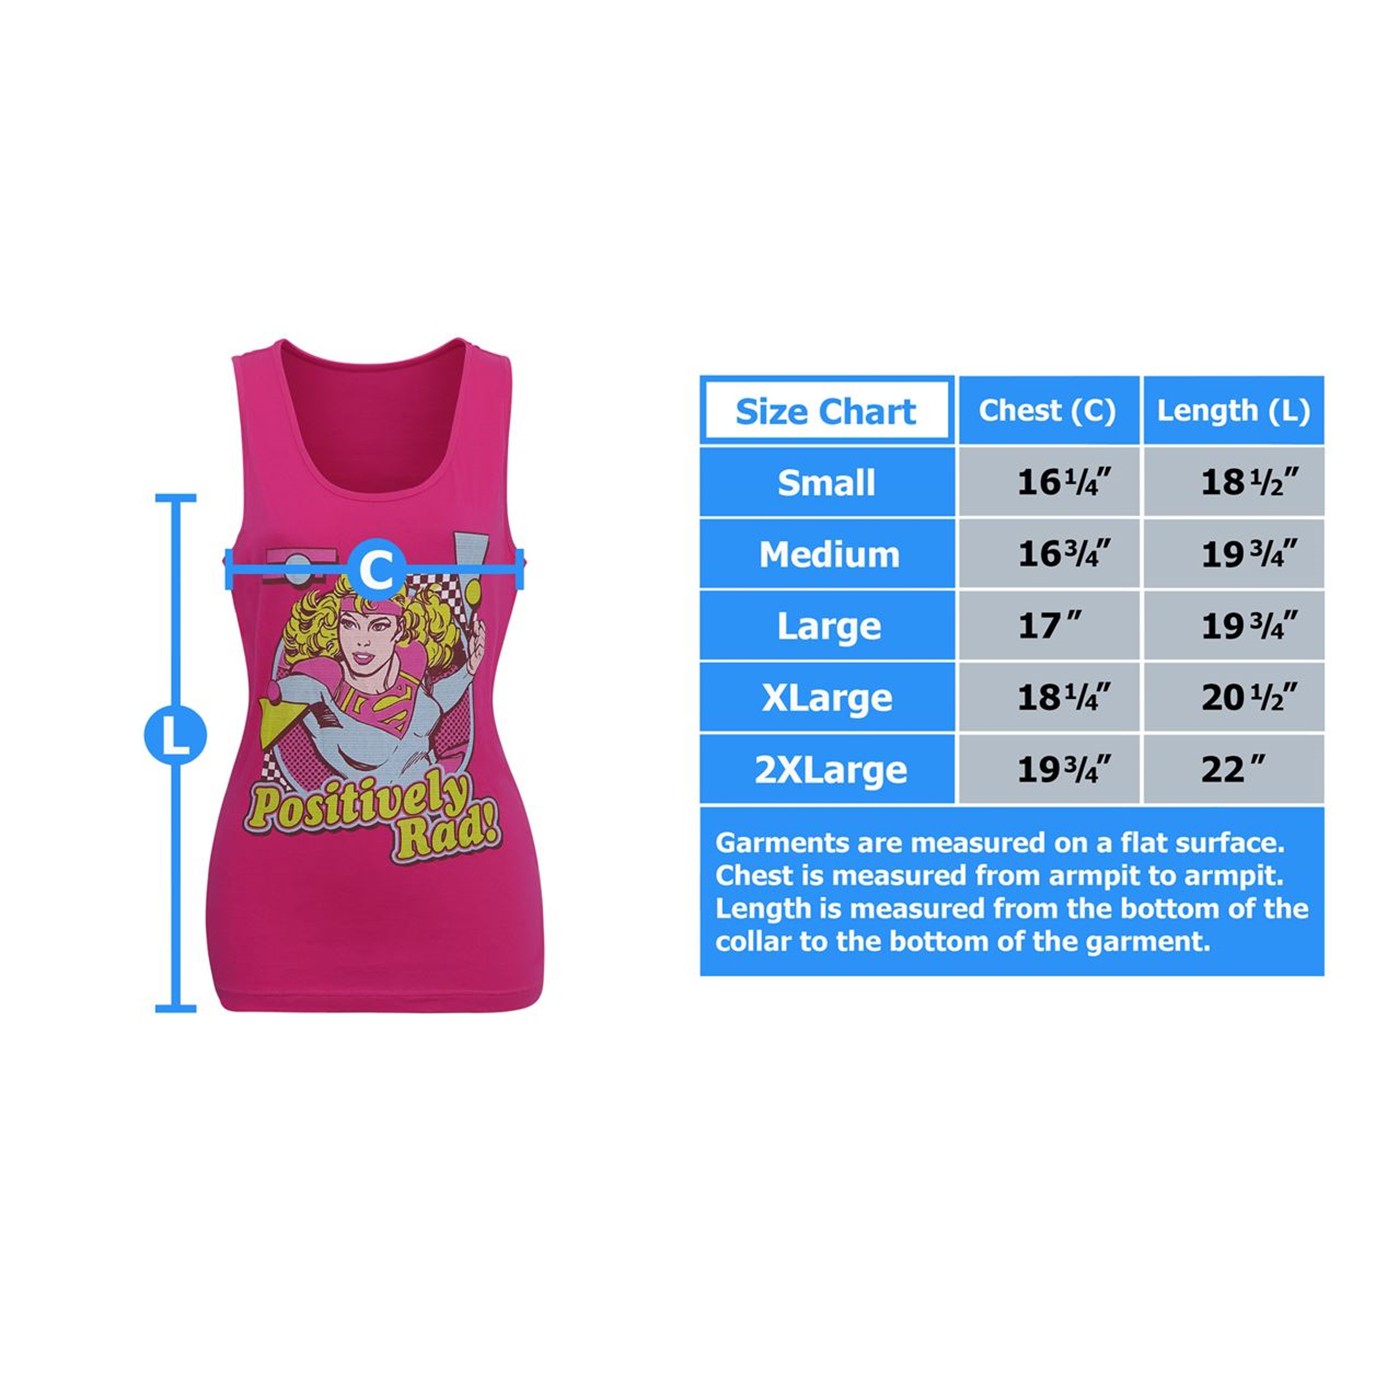 Supergirl Positively Rad Women's Tank Top